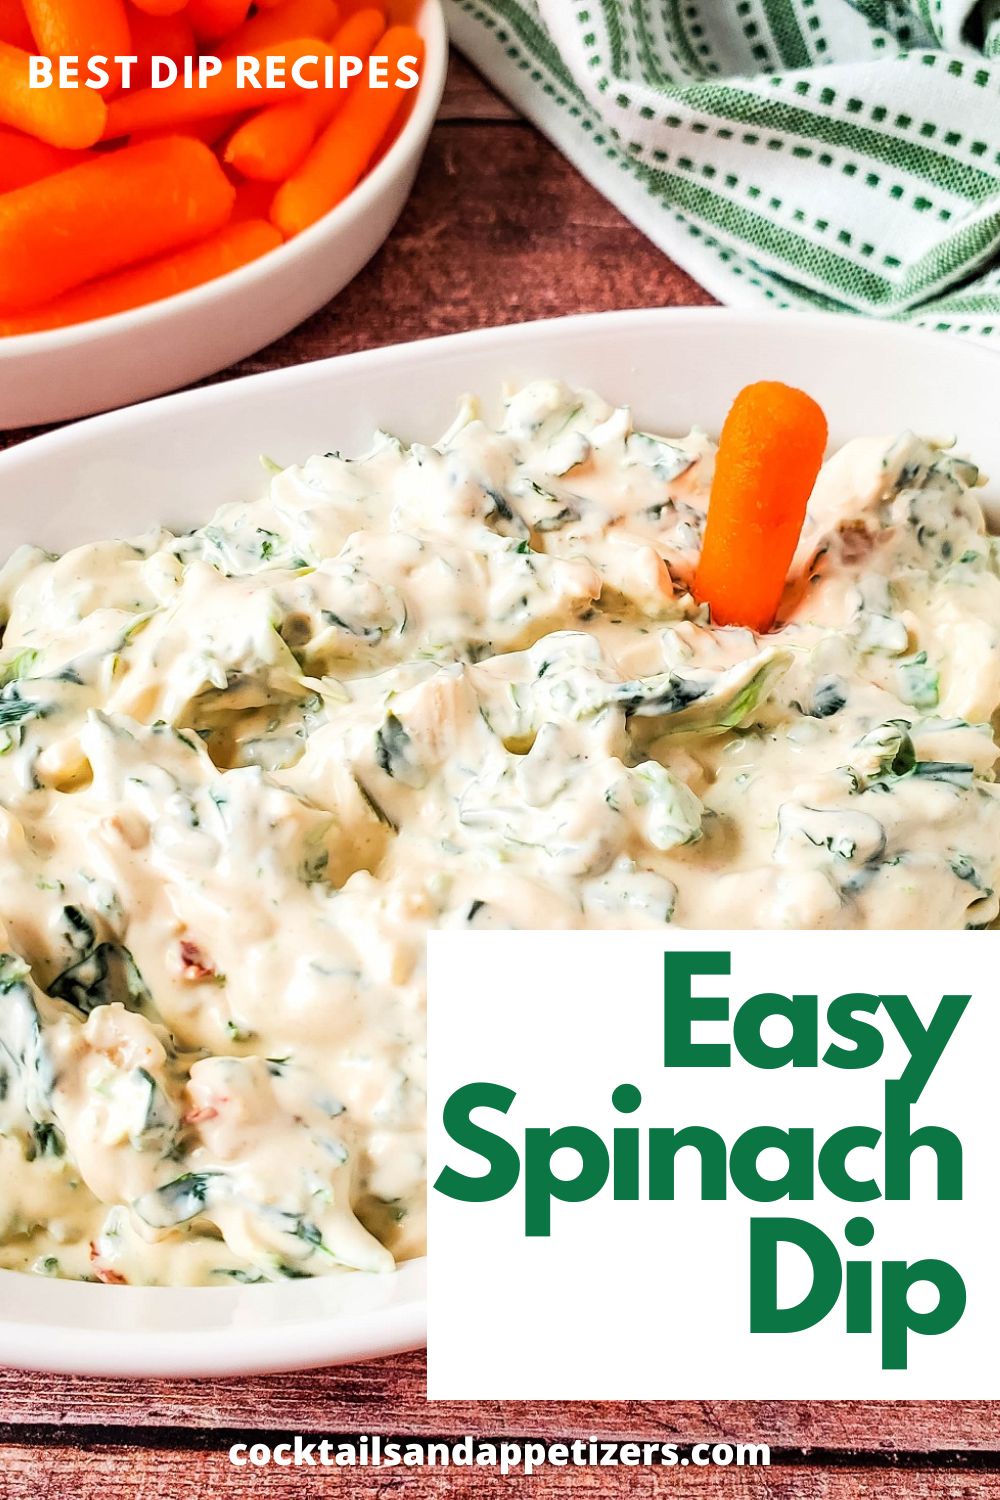 Knorr Spinach Dip in a bowl with fresh carrots for dipping.